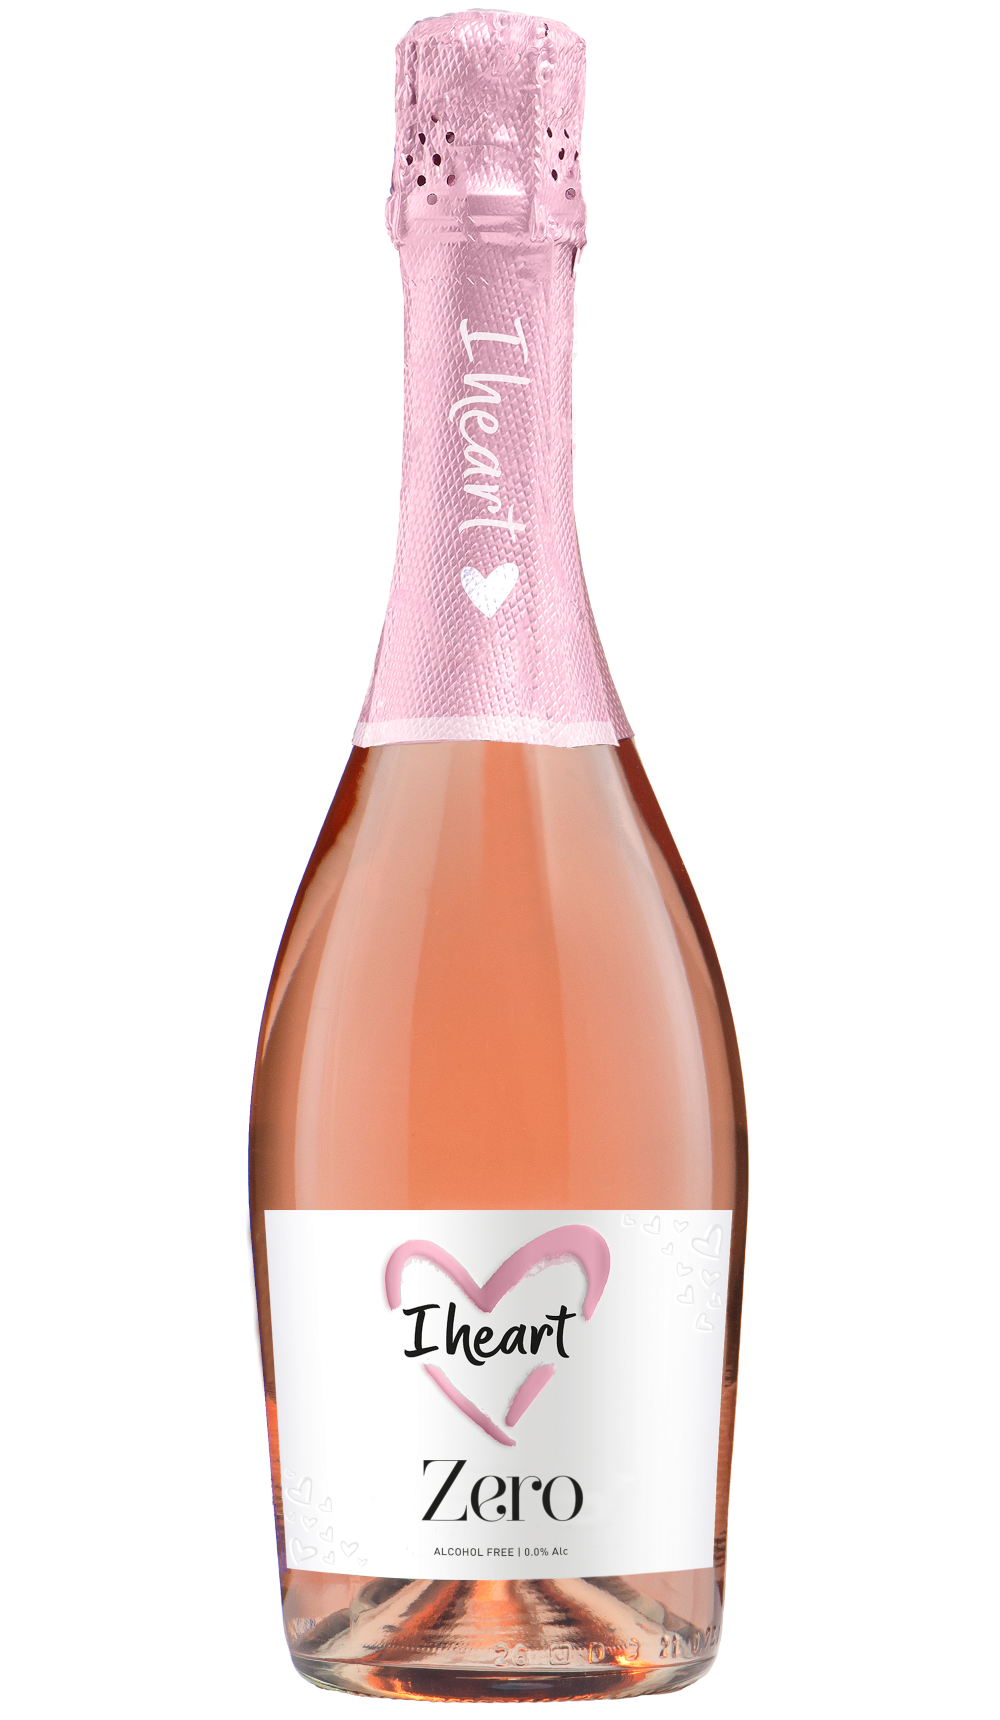 Our wines - heart wines I